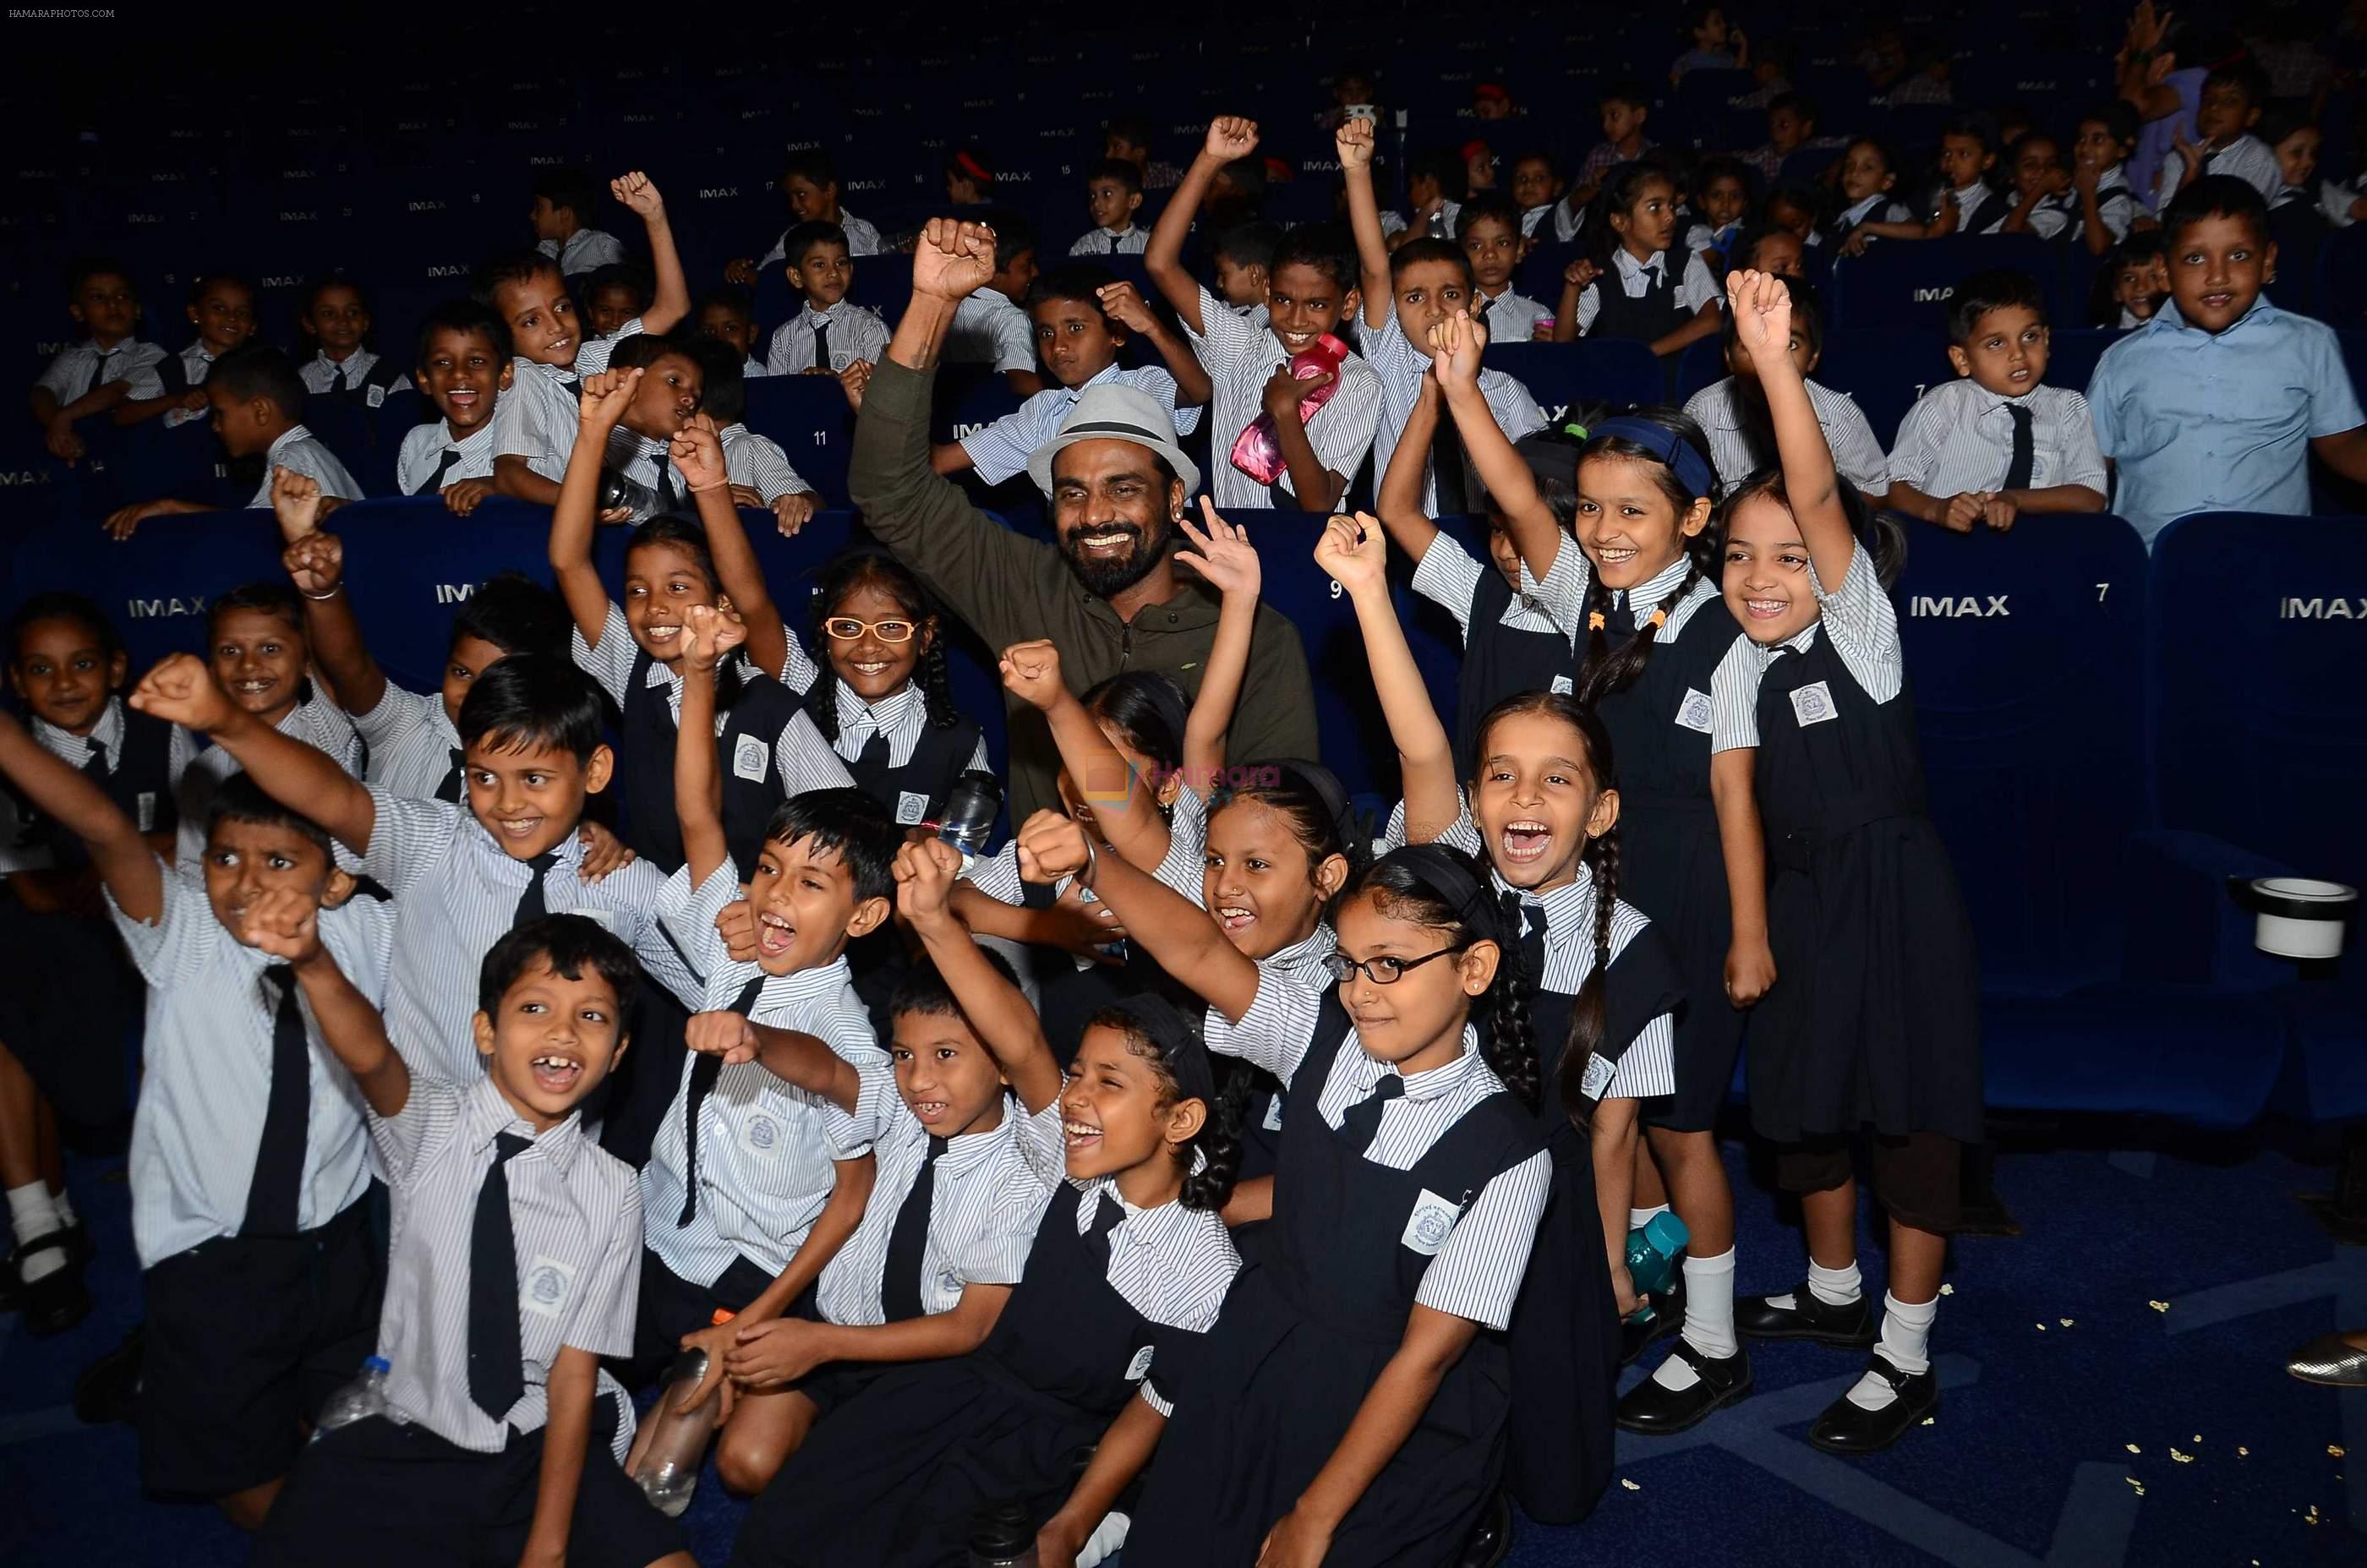 Remo D souza with kids for The flying jatt screening on 30th Aug 2016